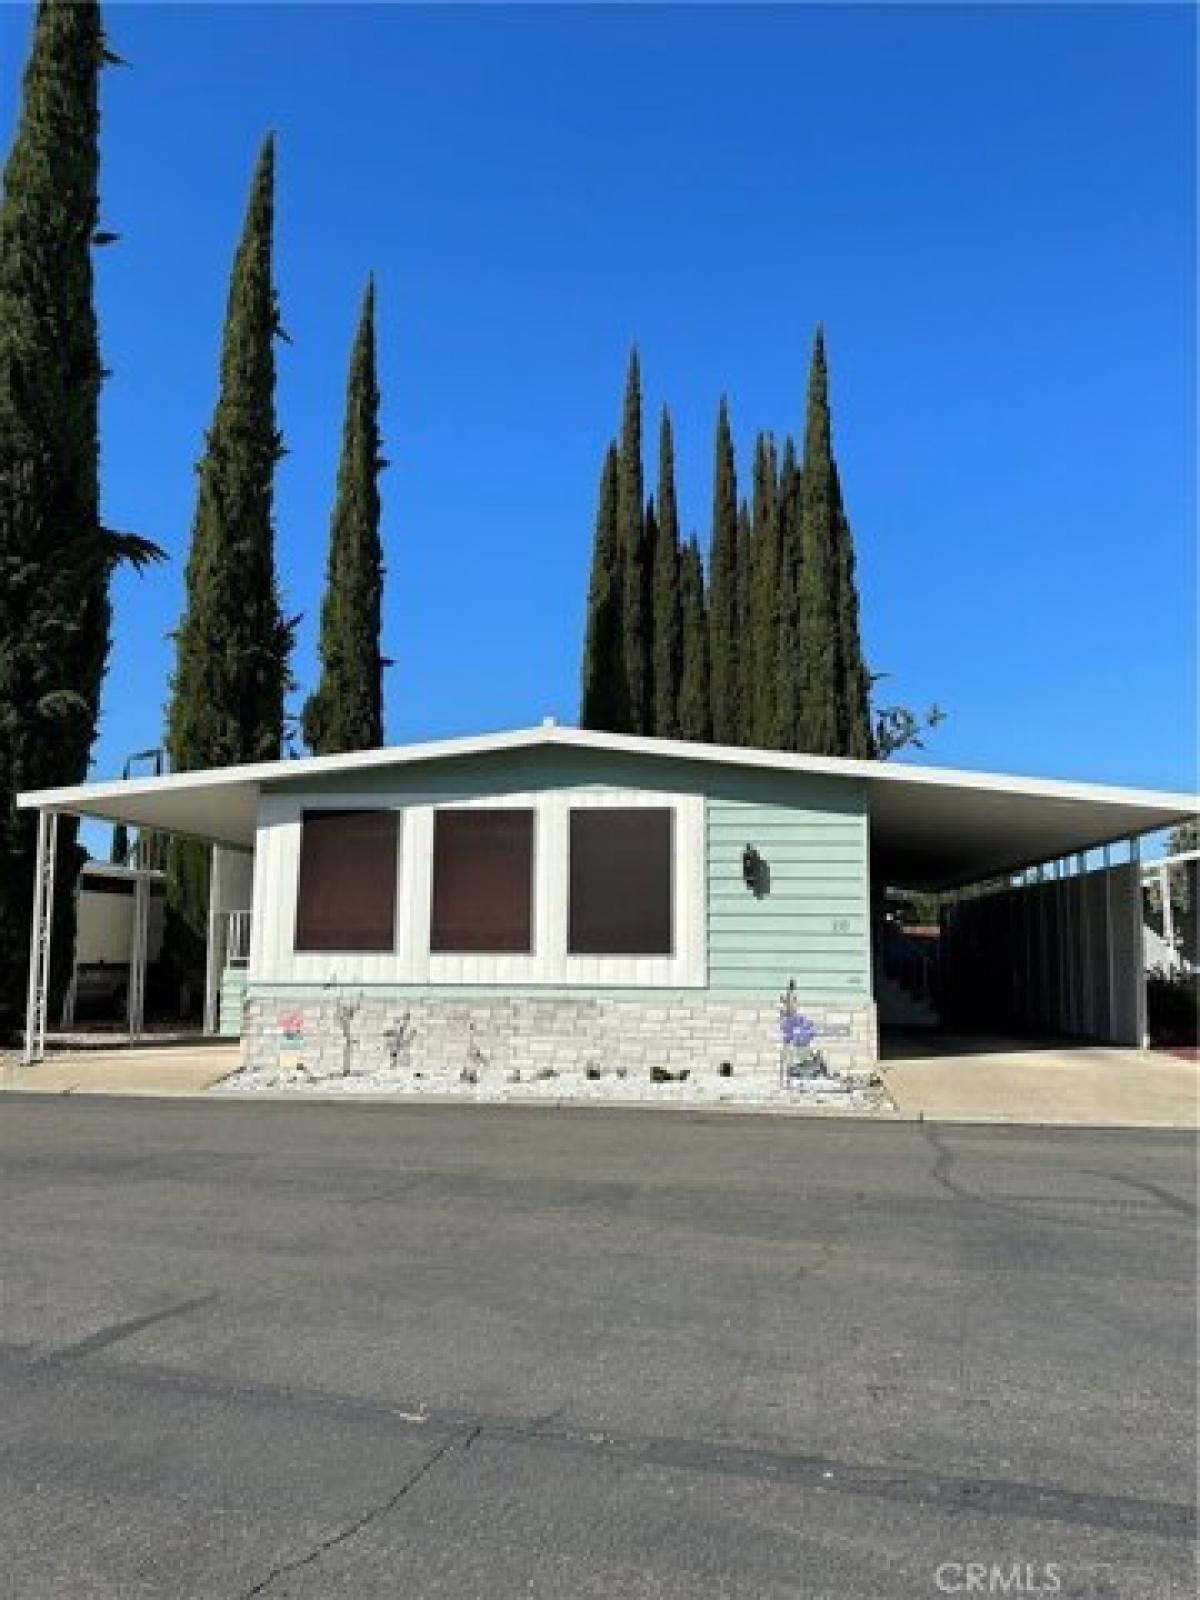 Picture of Home For Sale in Red Bluff, California, United States